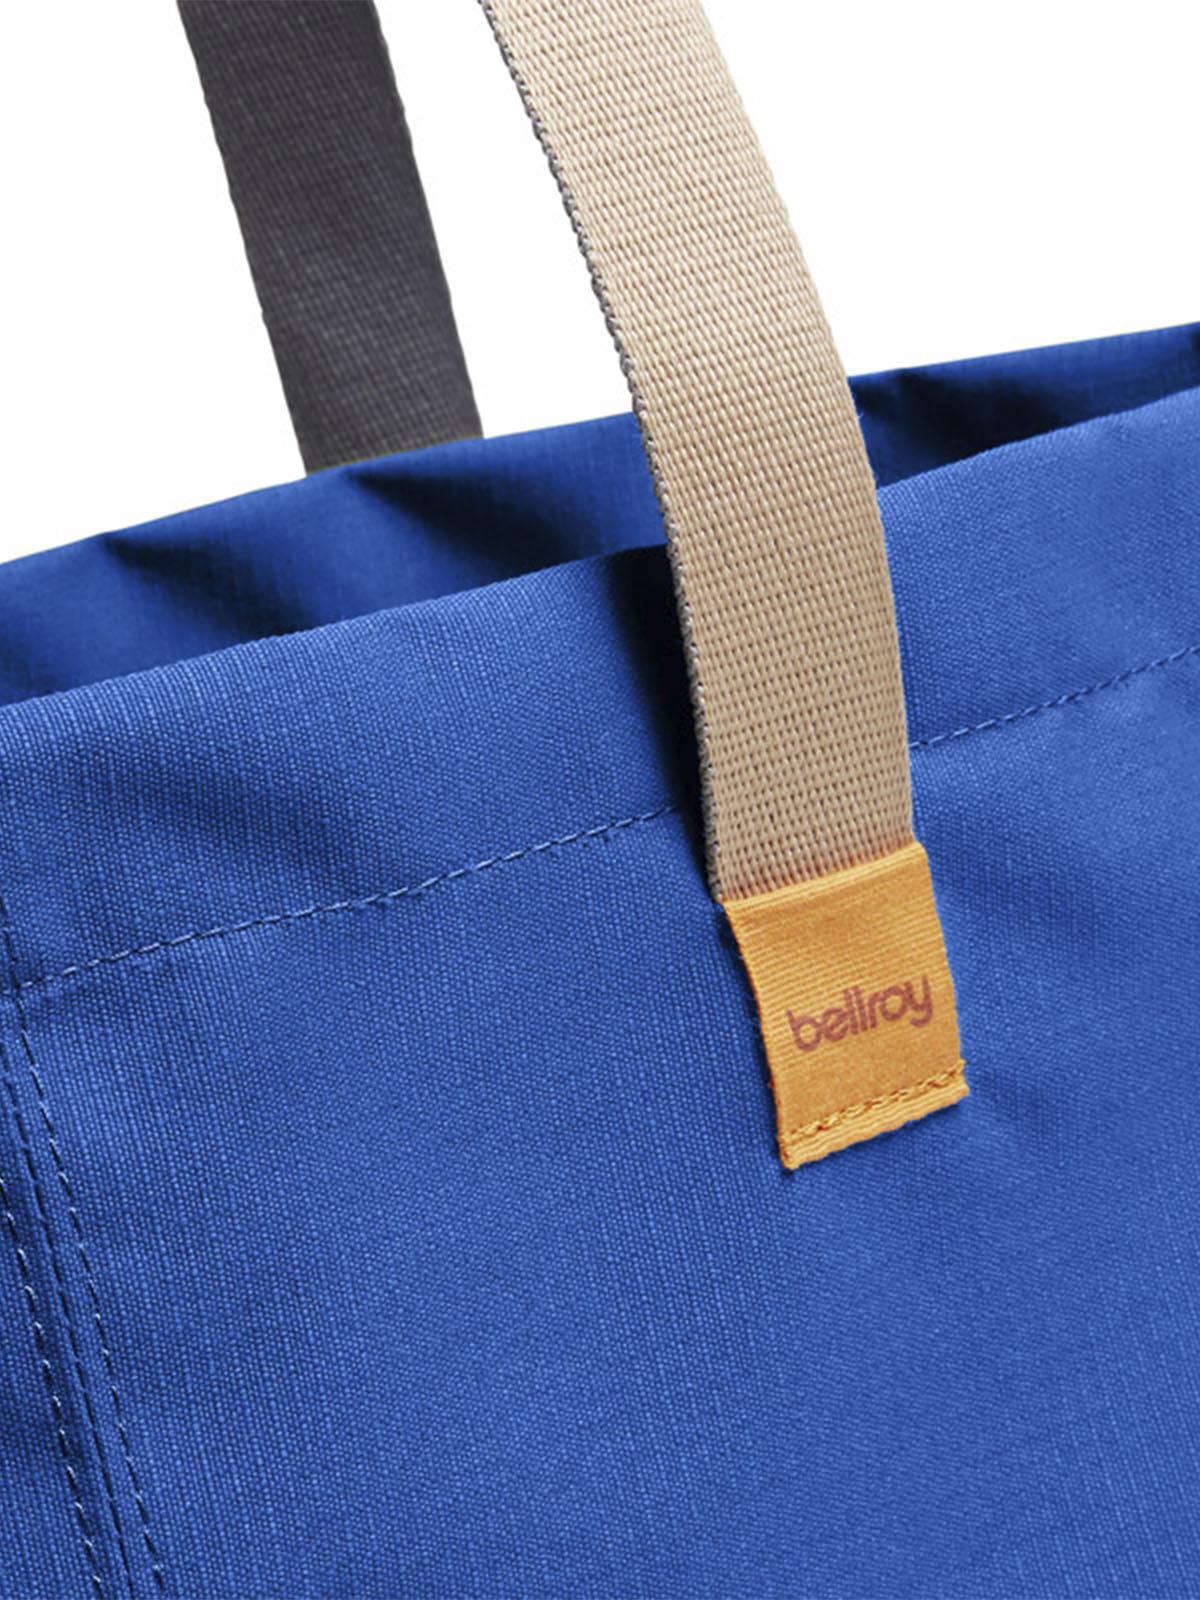 Bellroy Market Tote Pigment Blue (Leather-free)